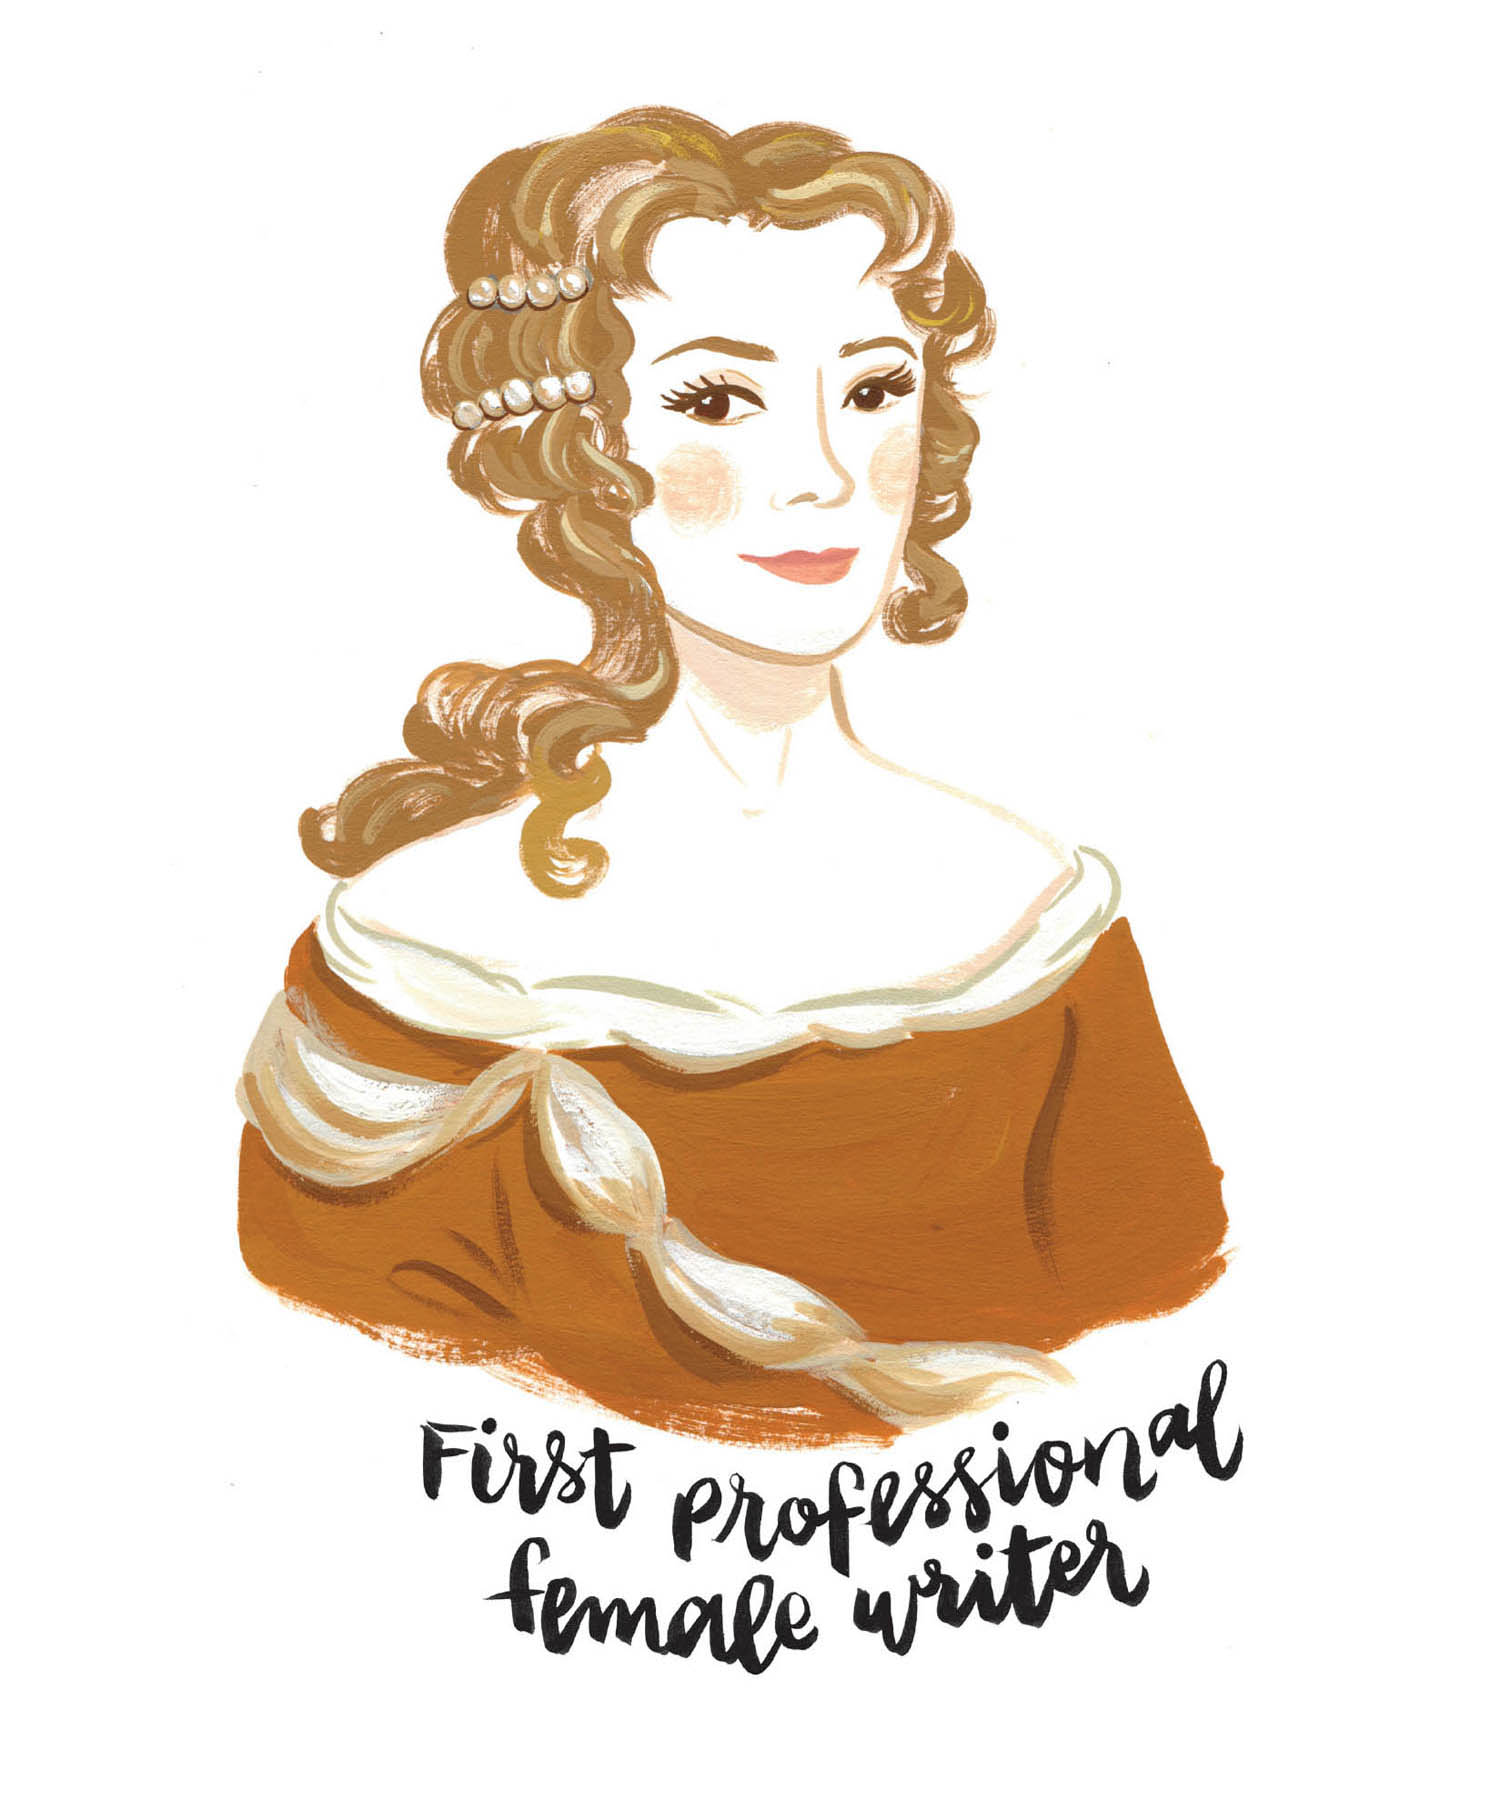 First professional female writer